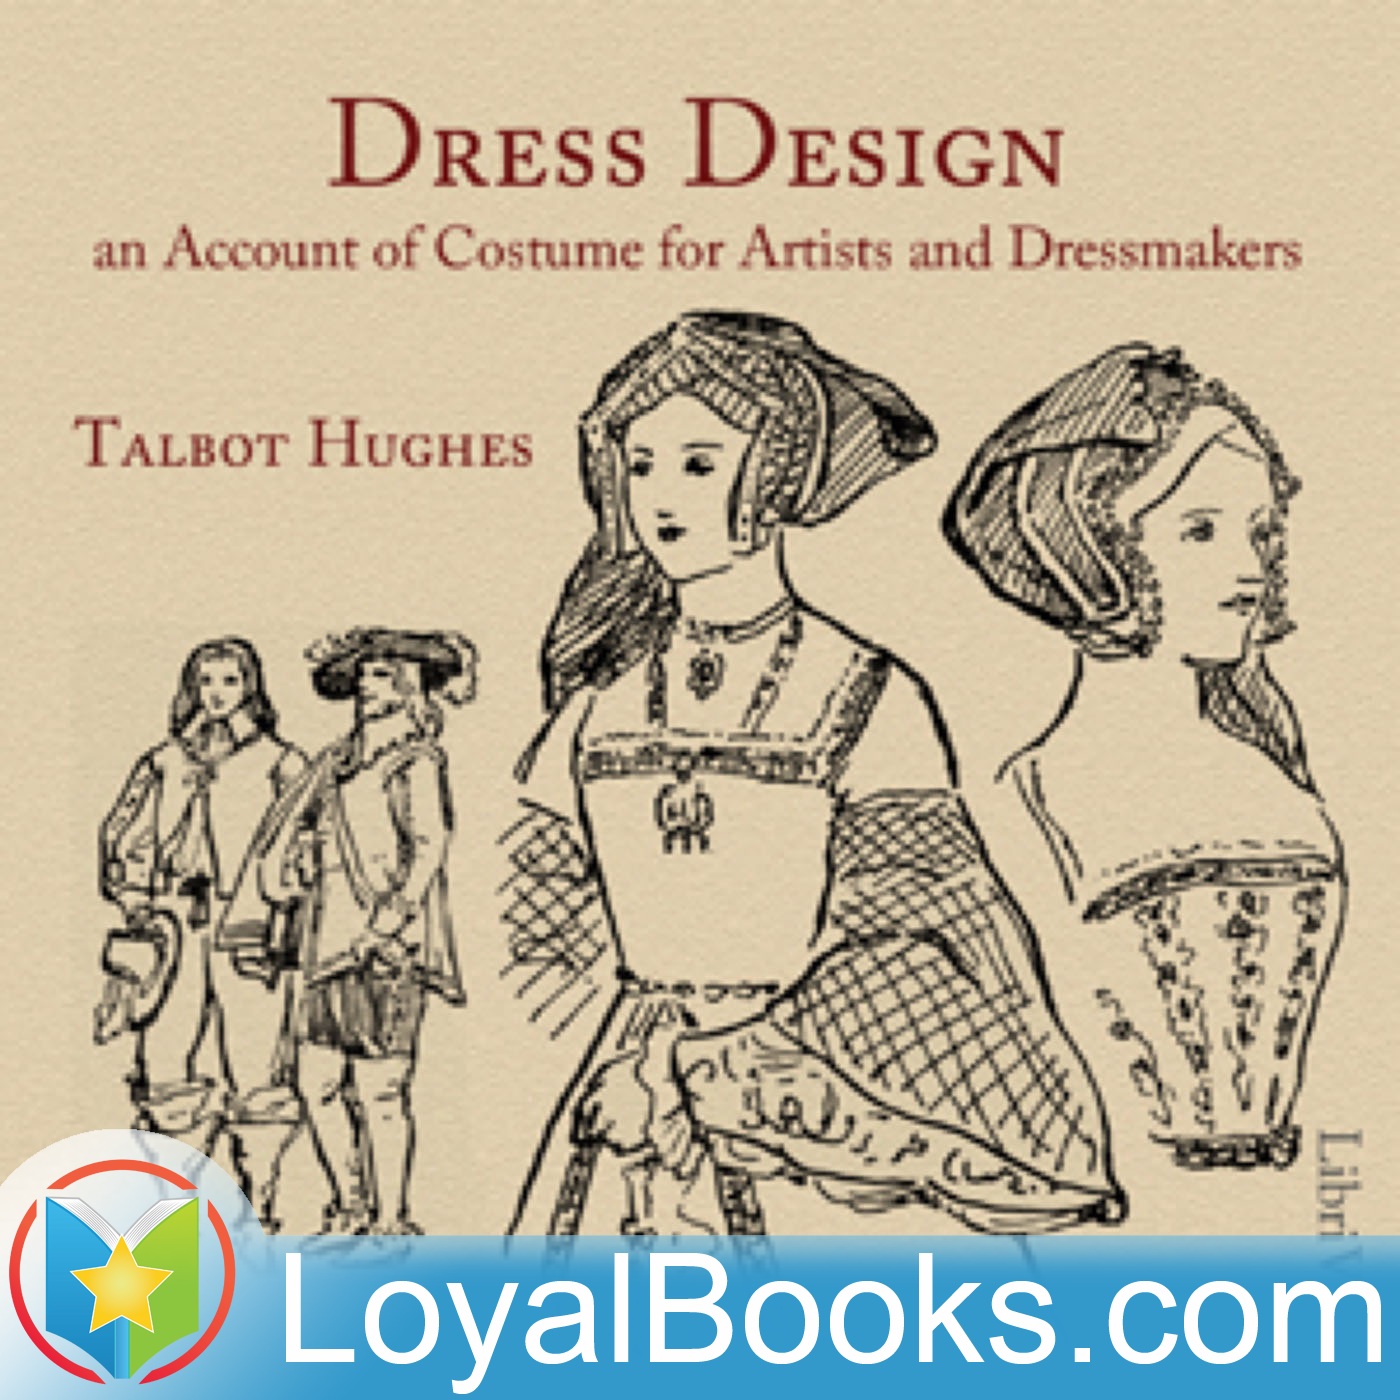 Dress Design: An Account of Costume for Artists and Dressmakers by Talbot Hughes